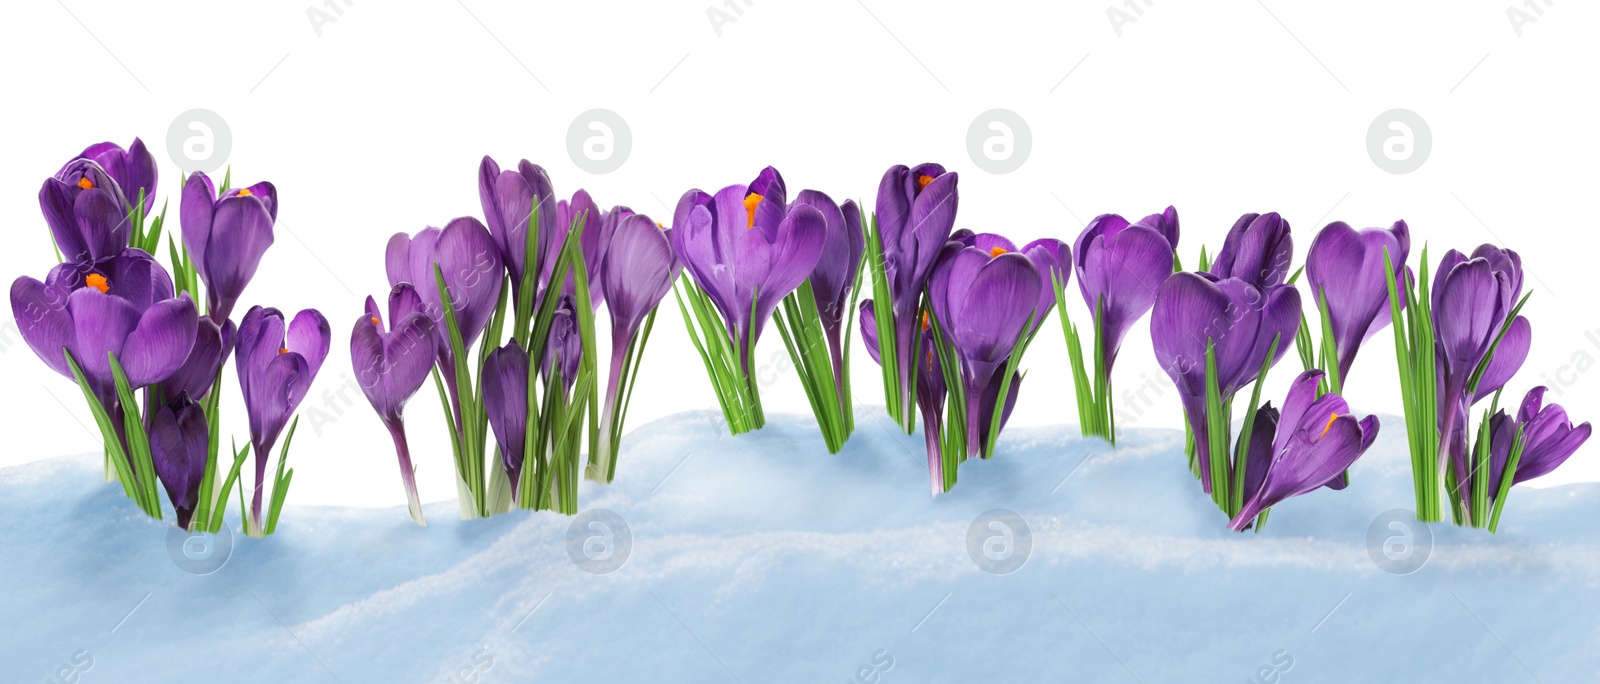 Image of Beautiful crocuses growing through snow against white background, banner design. First spring flowers